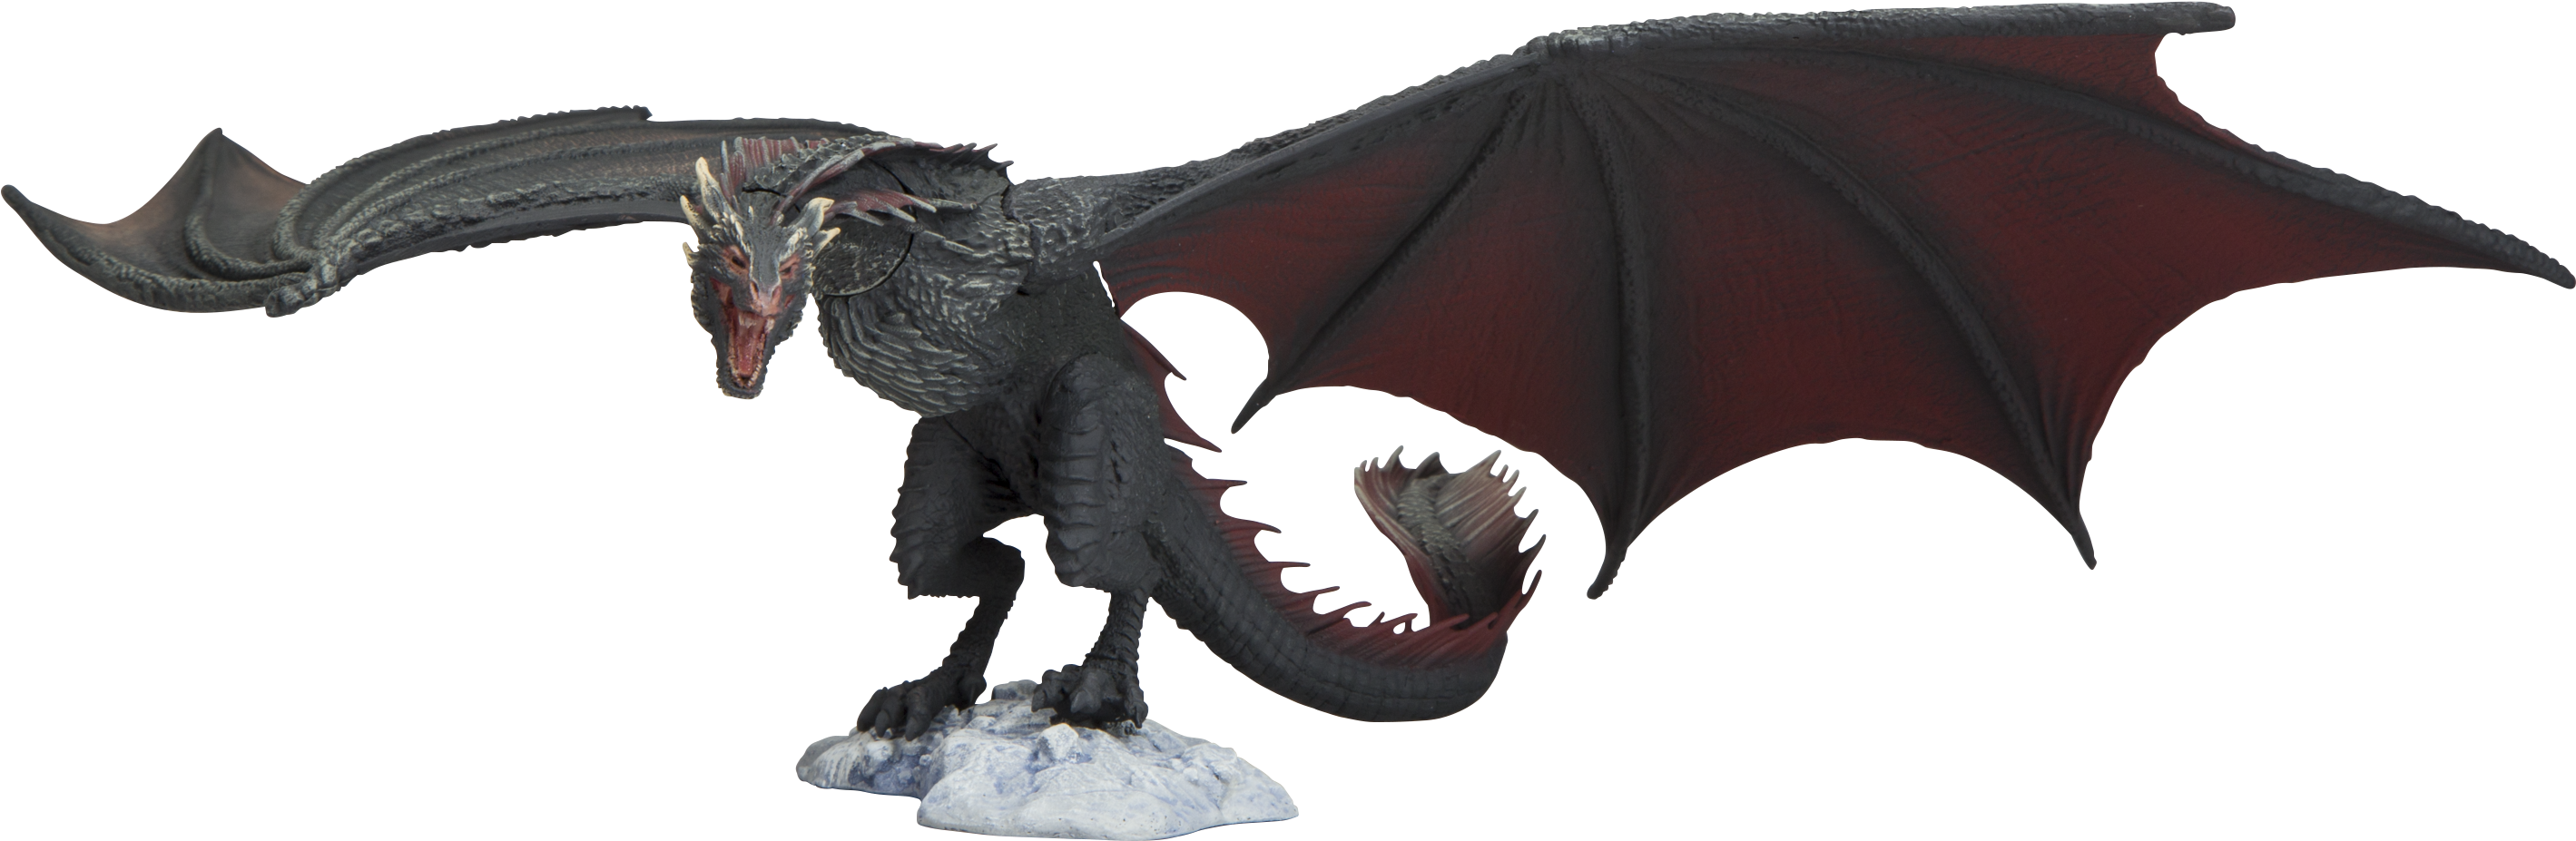 Fantasy Game Dragon Thrones Of PNG Image